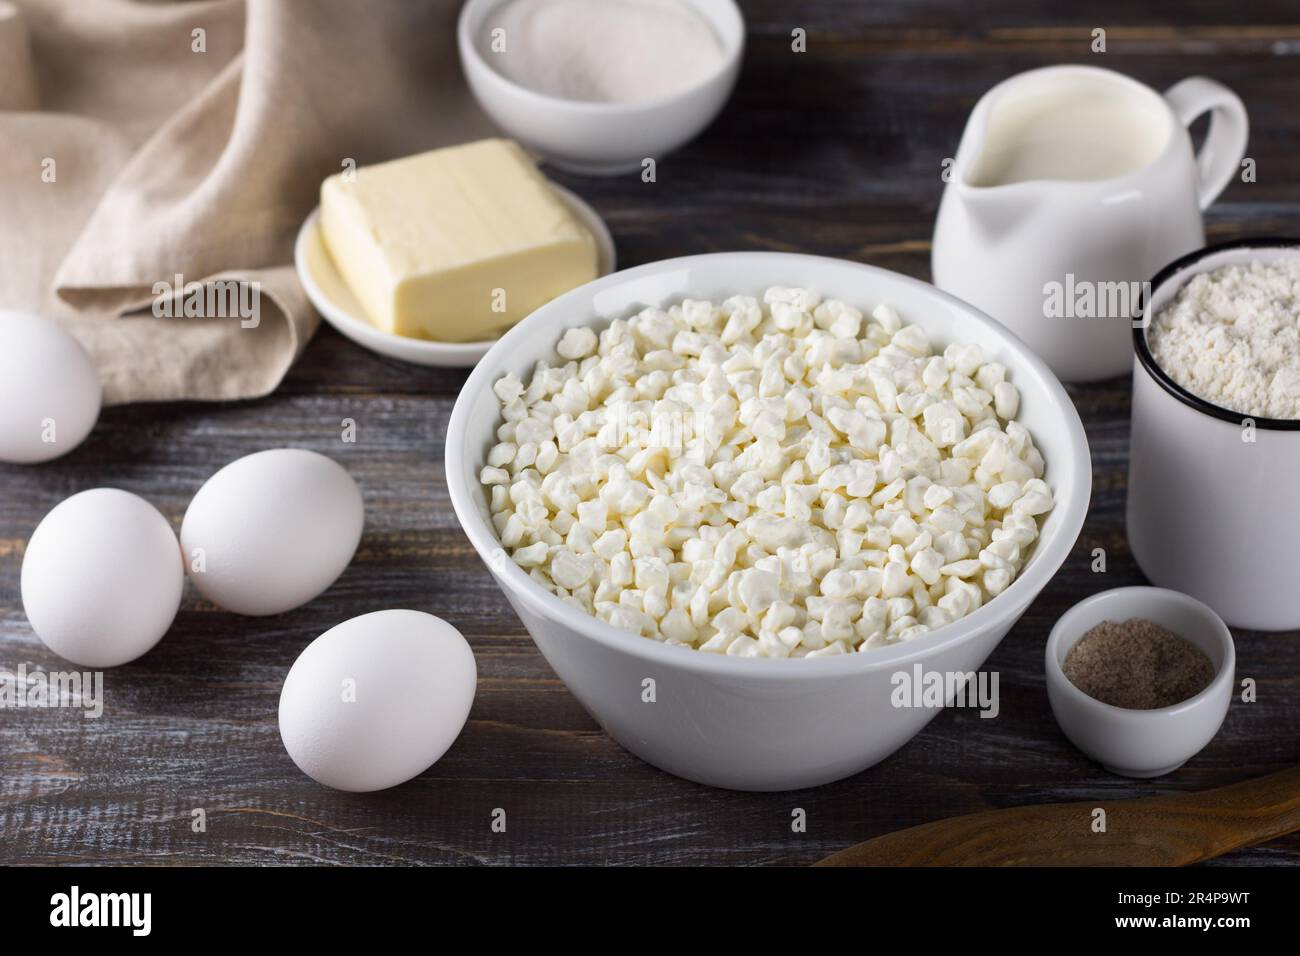 Bowl with cottage cheese, eggs, flour, butter, milk, sugar, vanilla sugar on a wooden background. Ingredients for home baking Stock Photo